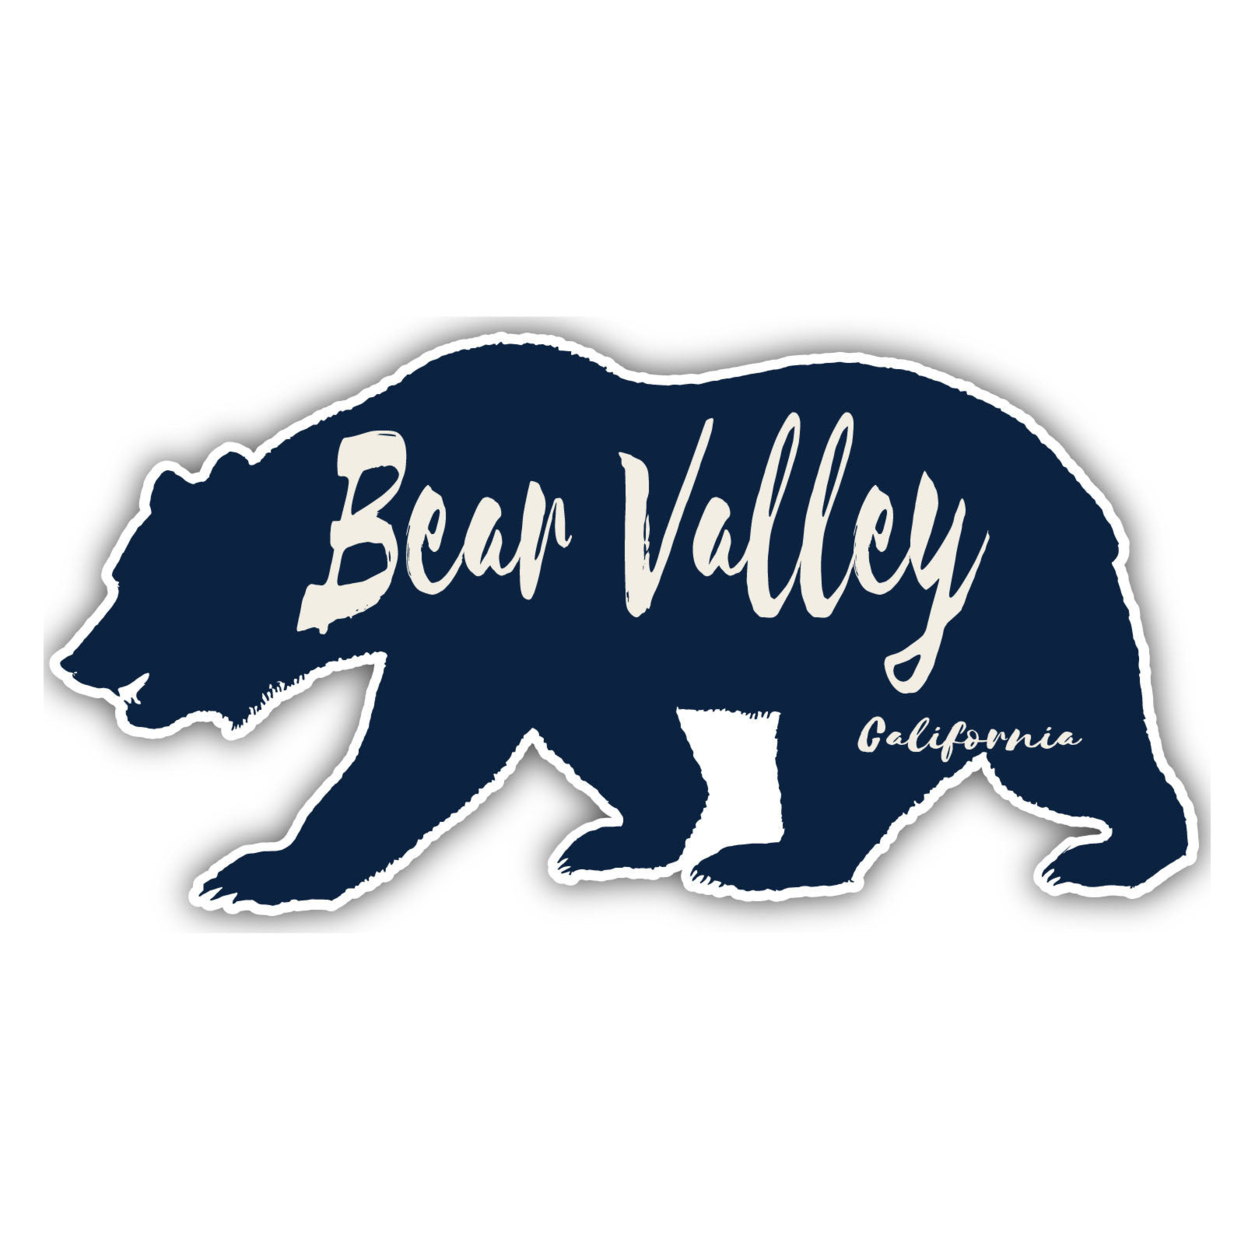 Bear Valley California Souvenir Decorative Stickers (Choose Theme And Size) - 4-Pack, 4-Inch, Bear